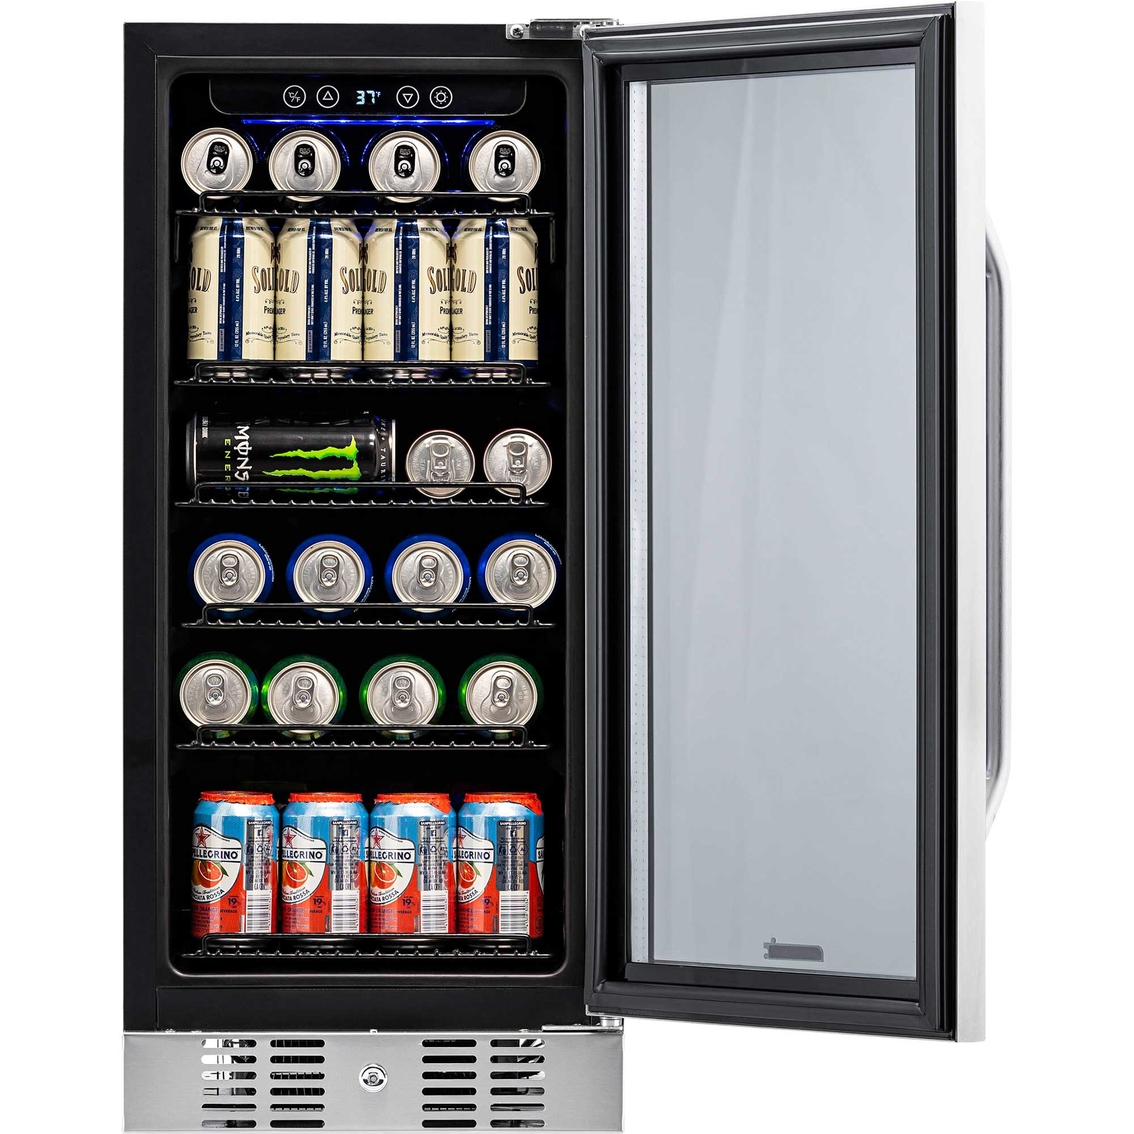 NewAir 15 in. 96 Can Beverage Cooler - Image 3 of 10